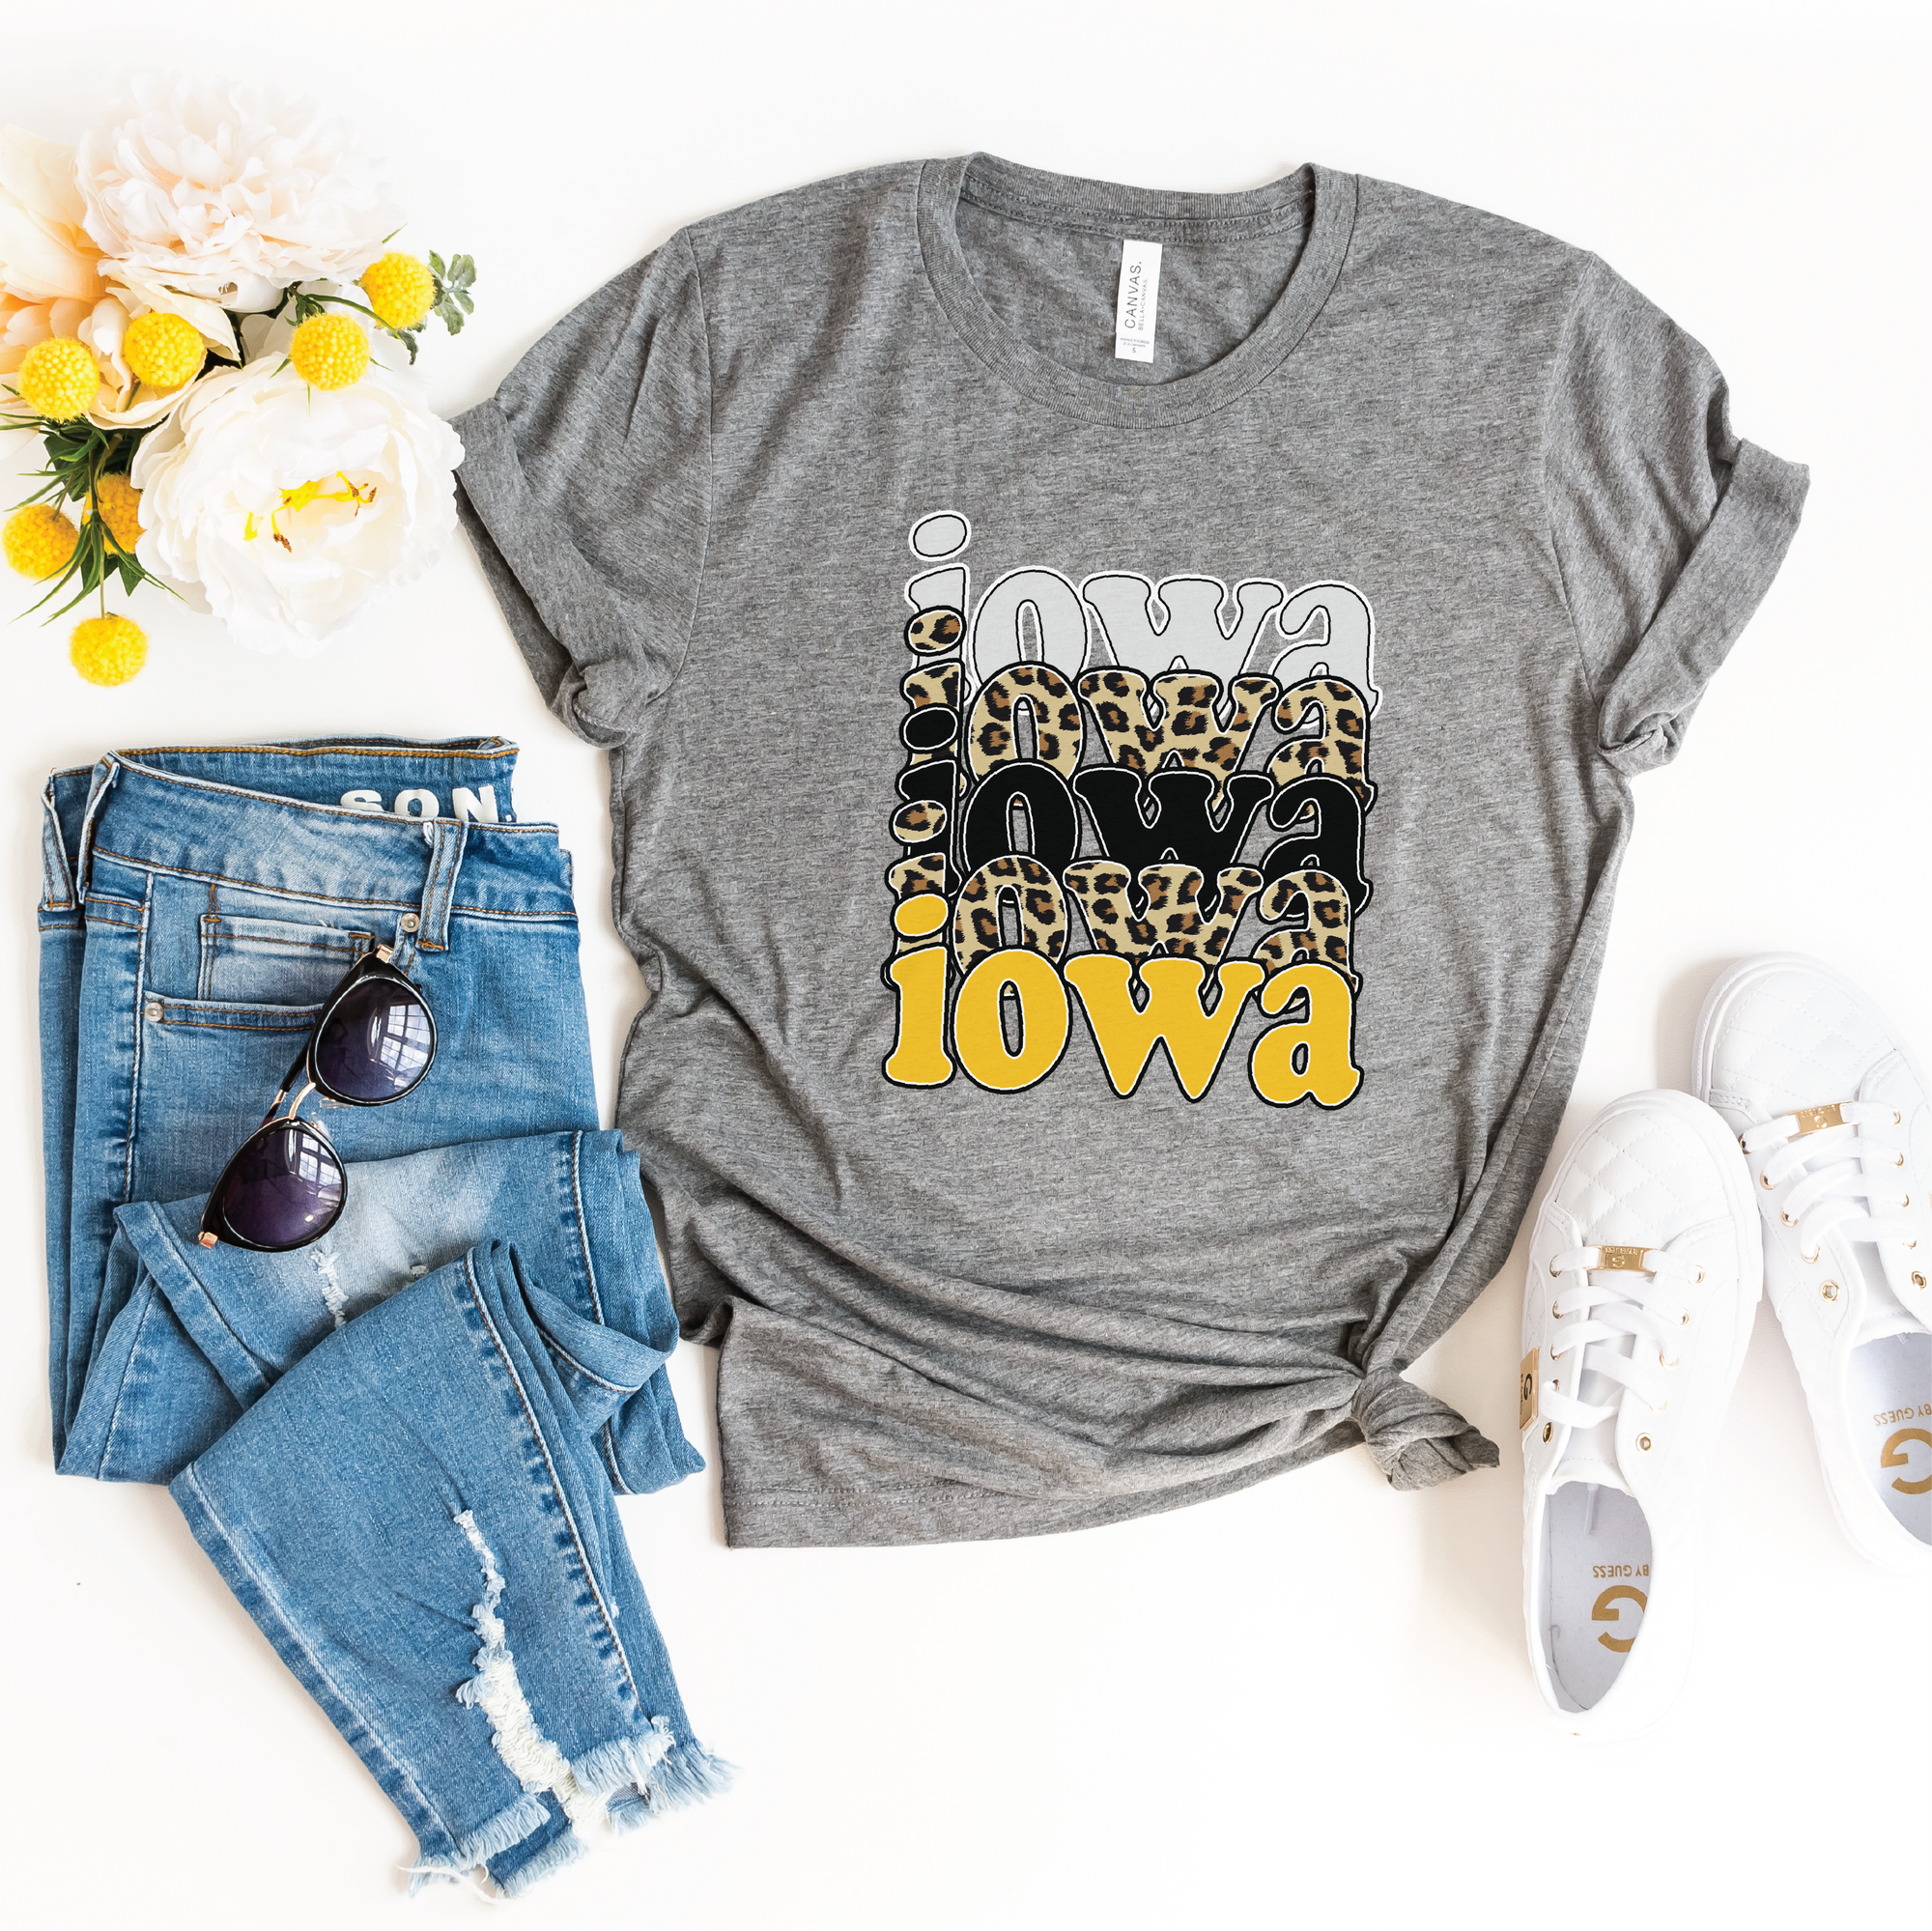 Iowa Repeat Grey Tee - The Red Rival